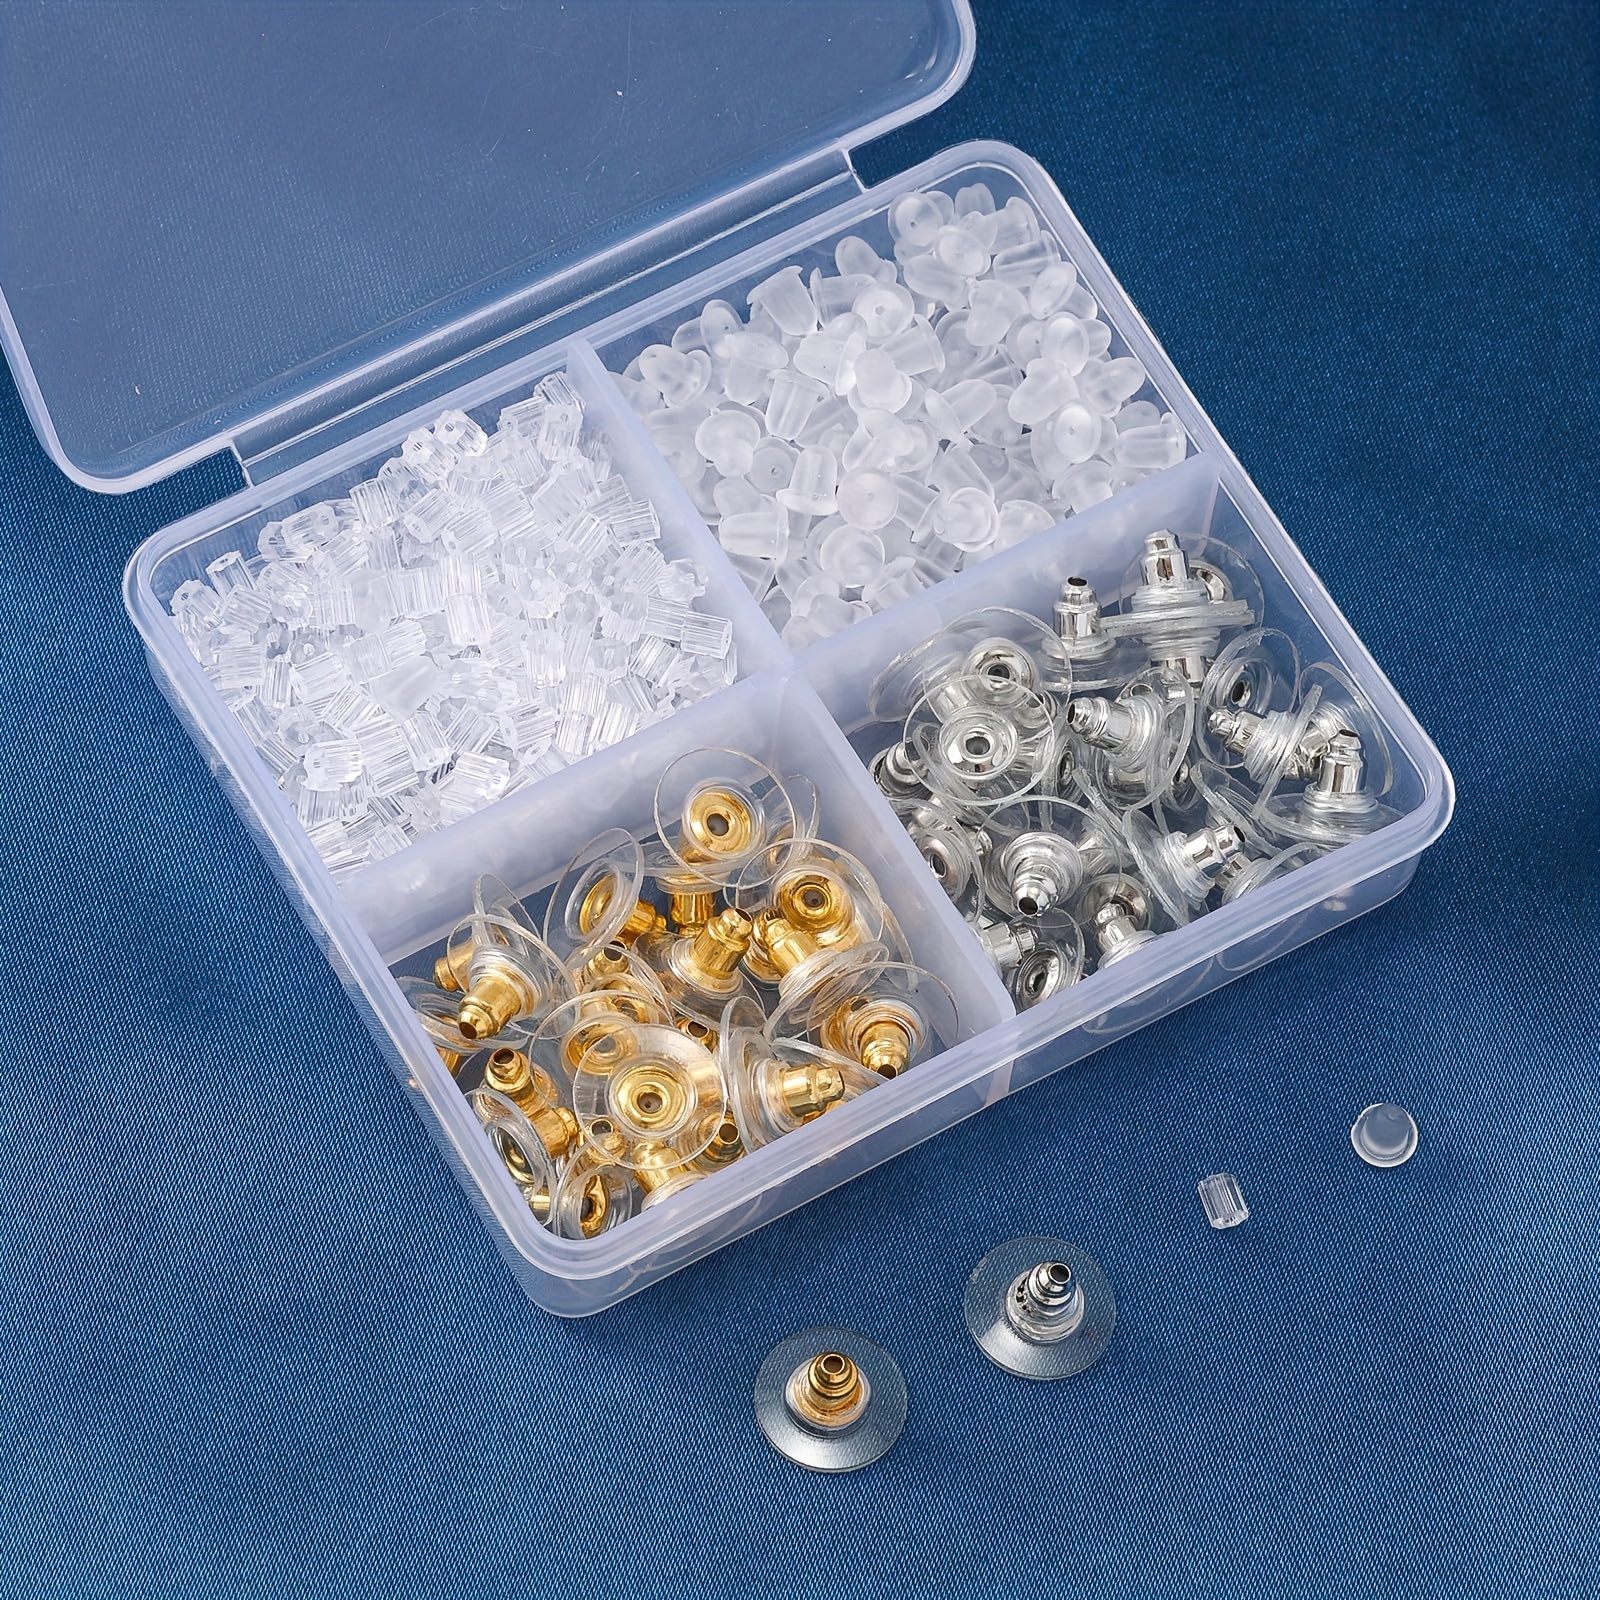 

4 Styles 620pcs Silicone Earring Backs For Studs, Clear Earring Backings Hypoallergenic Plastic Rubber Earring Backs Bullet Clutch Stoppers Replacement Kits For Fish Hook Earring Pin Back Accessories